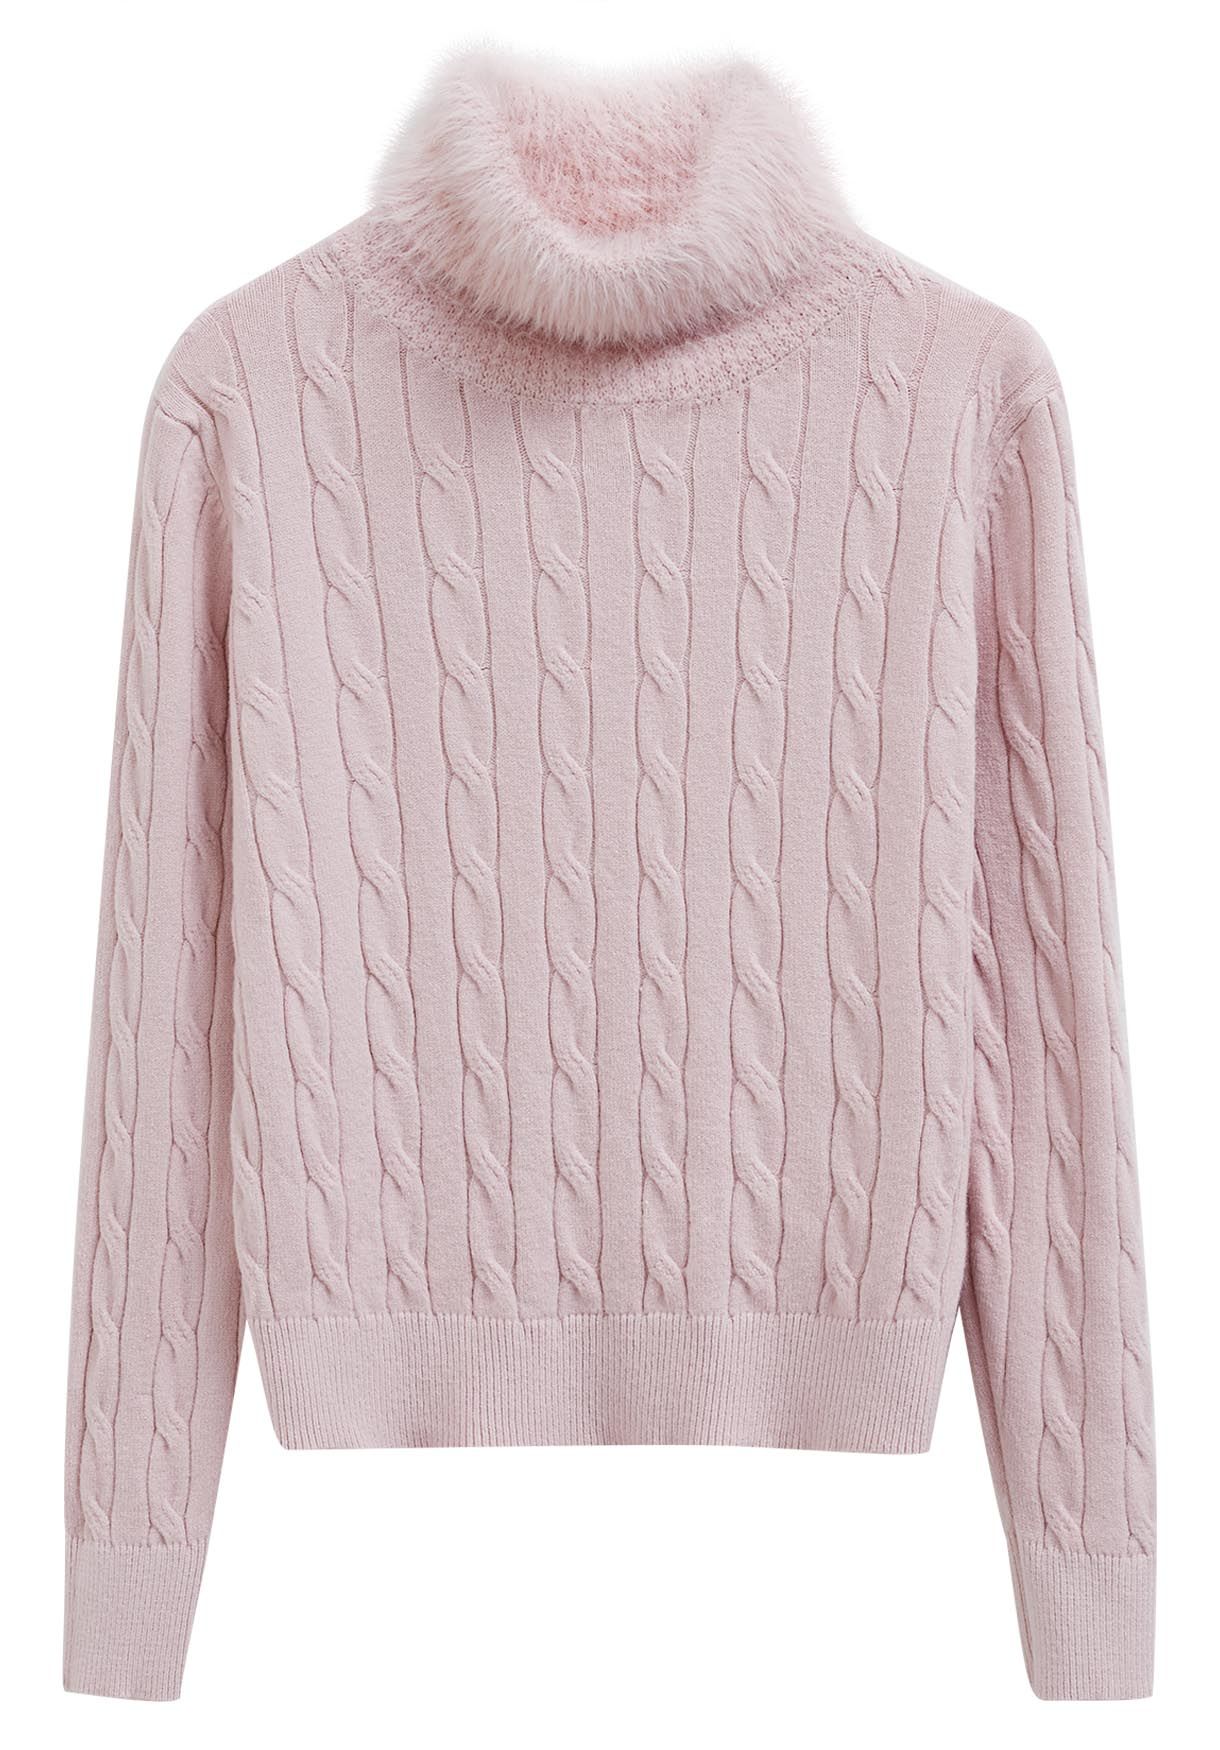 Soft Fuzzy Turtleneck Cable Knit Sweater in Pink